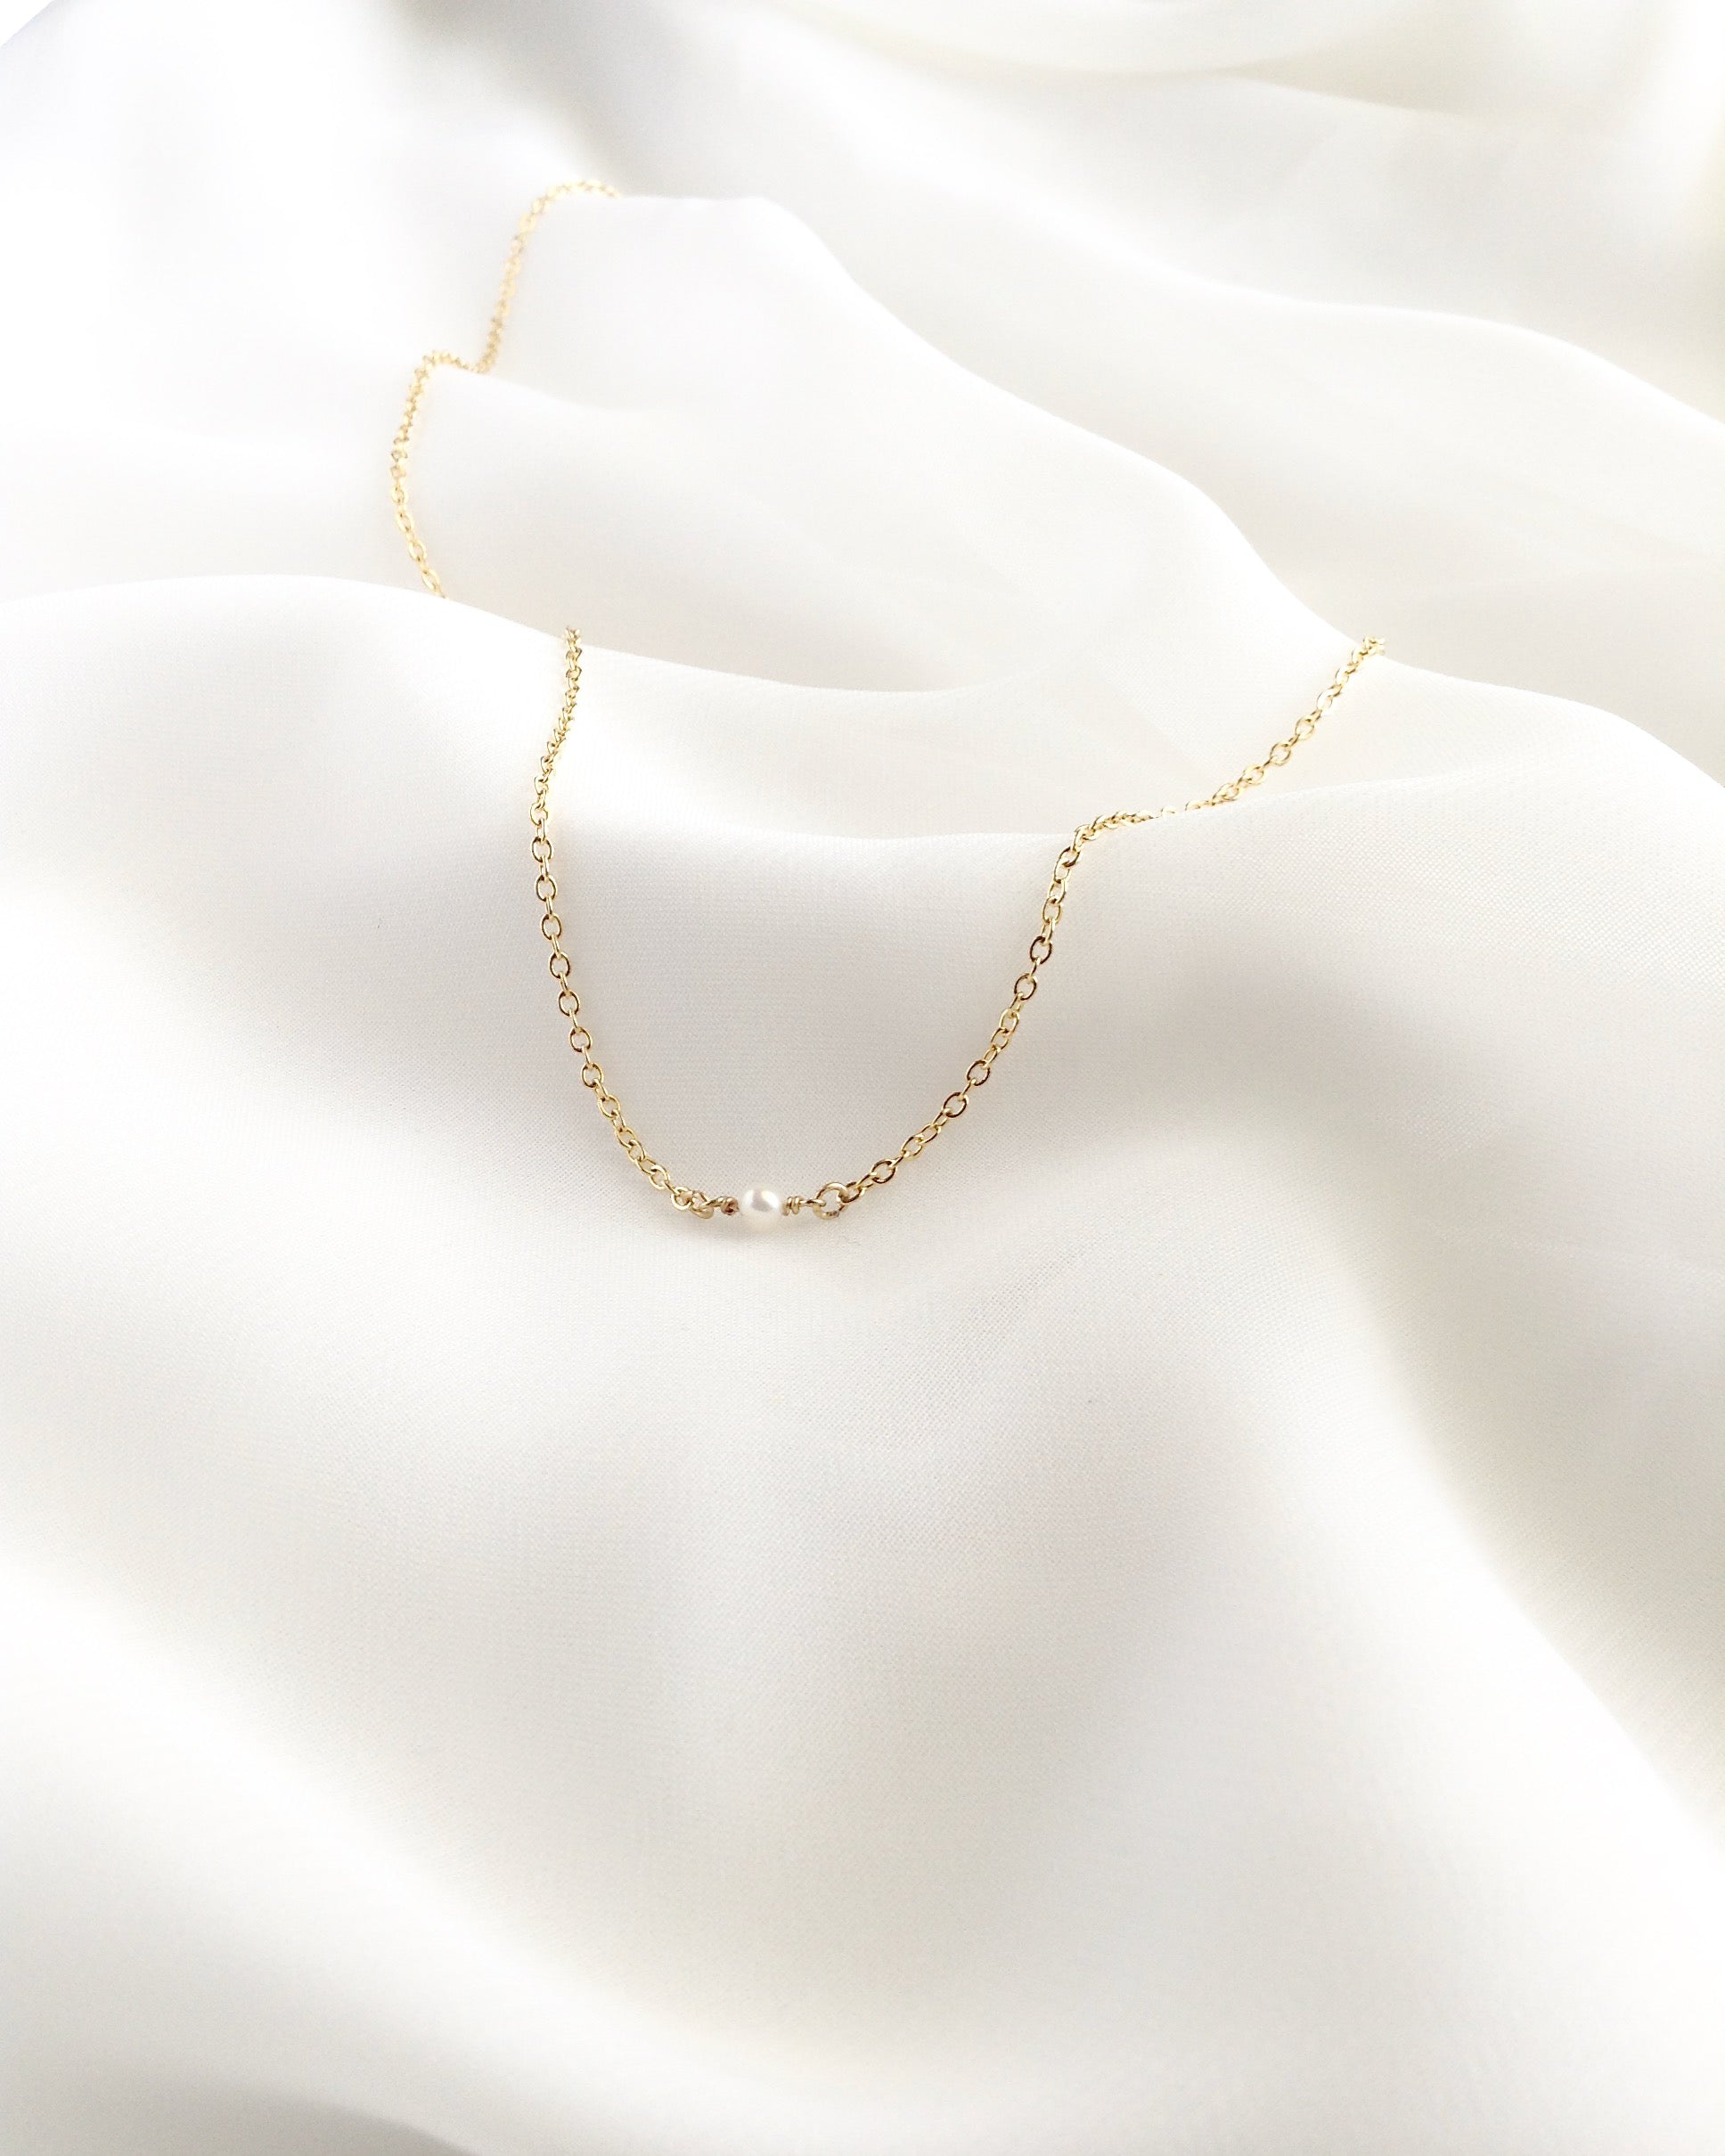 Tiny Minimalist Pearl Necklace | Simple Delicate Everyday Necklace | IB Jewelry